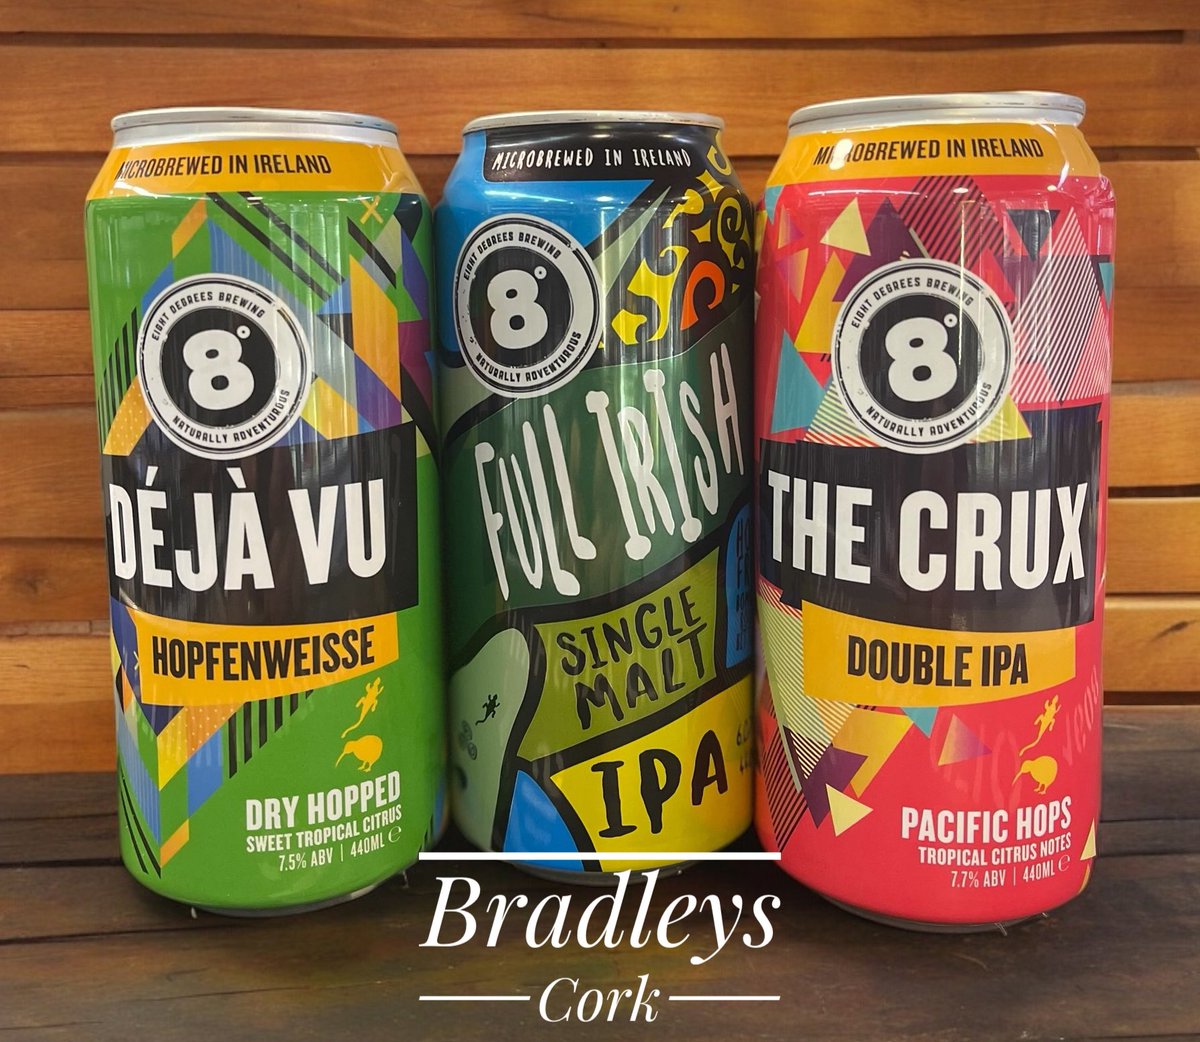 Great to have @8degreesbrewing back on the shelves and delighted to be first in the country with their new limited edition, The Crux Double IPA.